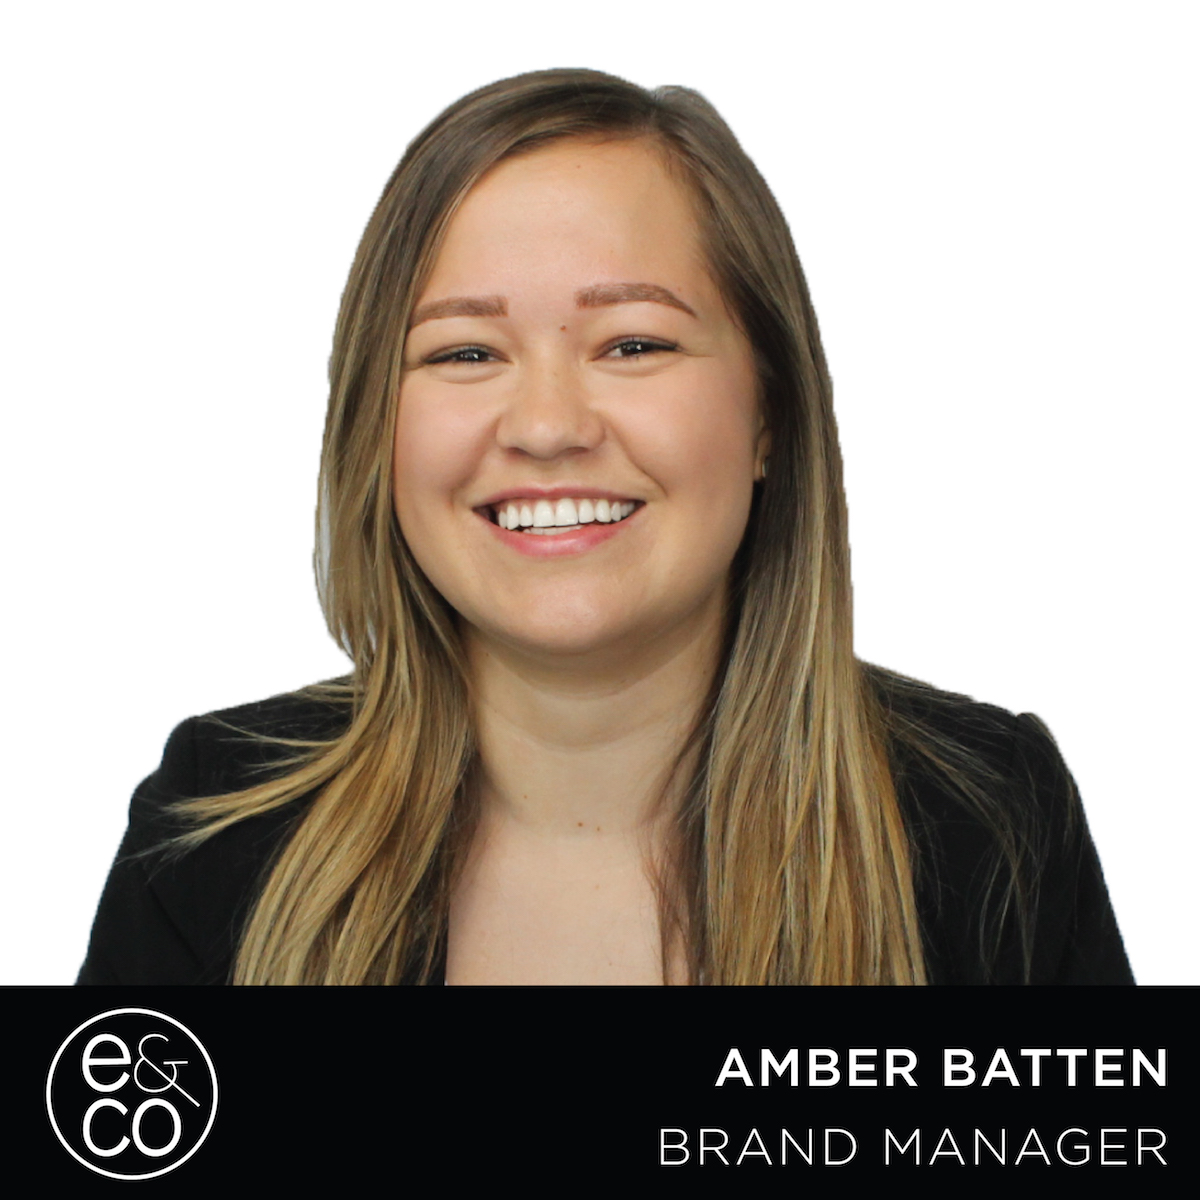 Q&A with Amber Batten | Brand Manager